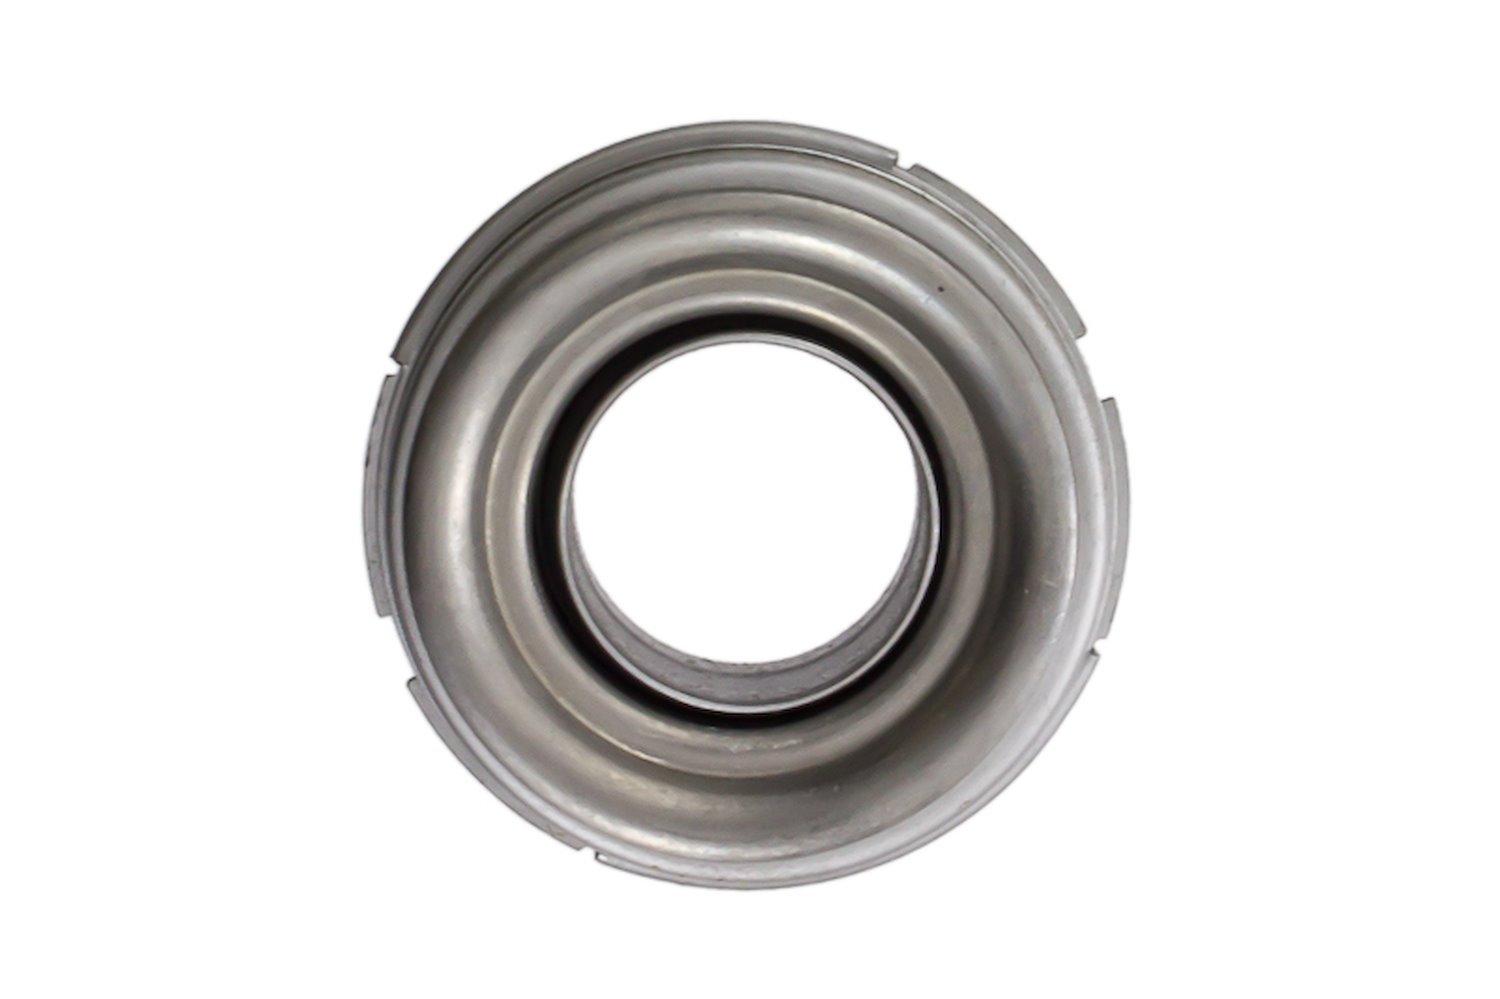 Clutch Release Bearing Fits Select Chrysler/Mitsubishi